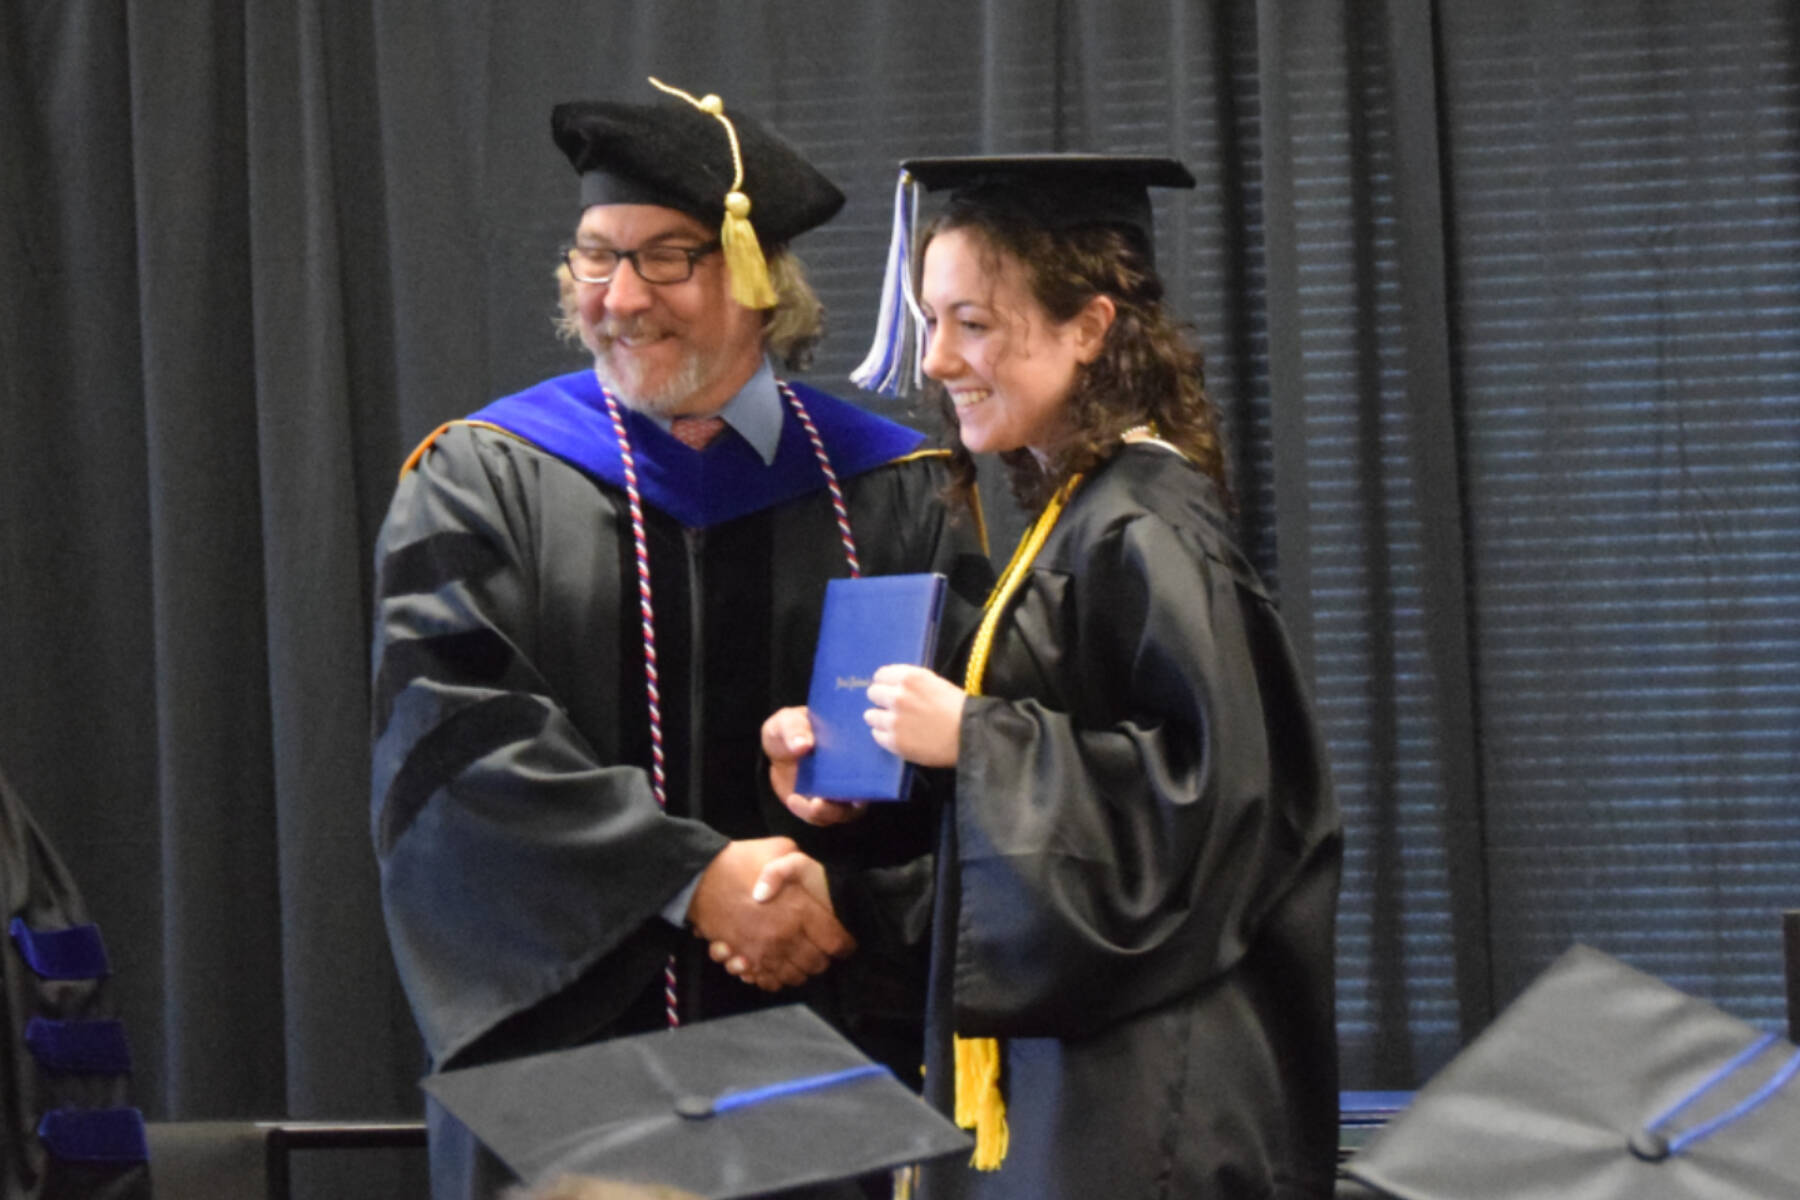 Kachemak Bay Campus Director Dr. Reid Brewer (left) presents valedictorian Elizabeth Rozeboom (right) with her Associate of Arts diploma during the 2023 KBC Commencement on Wednesday, May 10, 2023 in Homer, Alaska. Photo by Delcenia Cosman